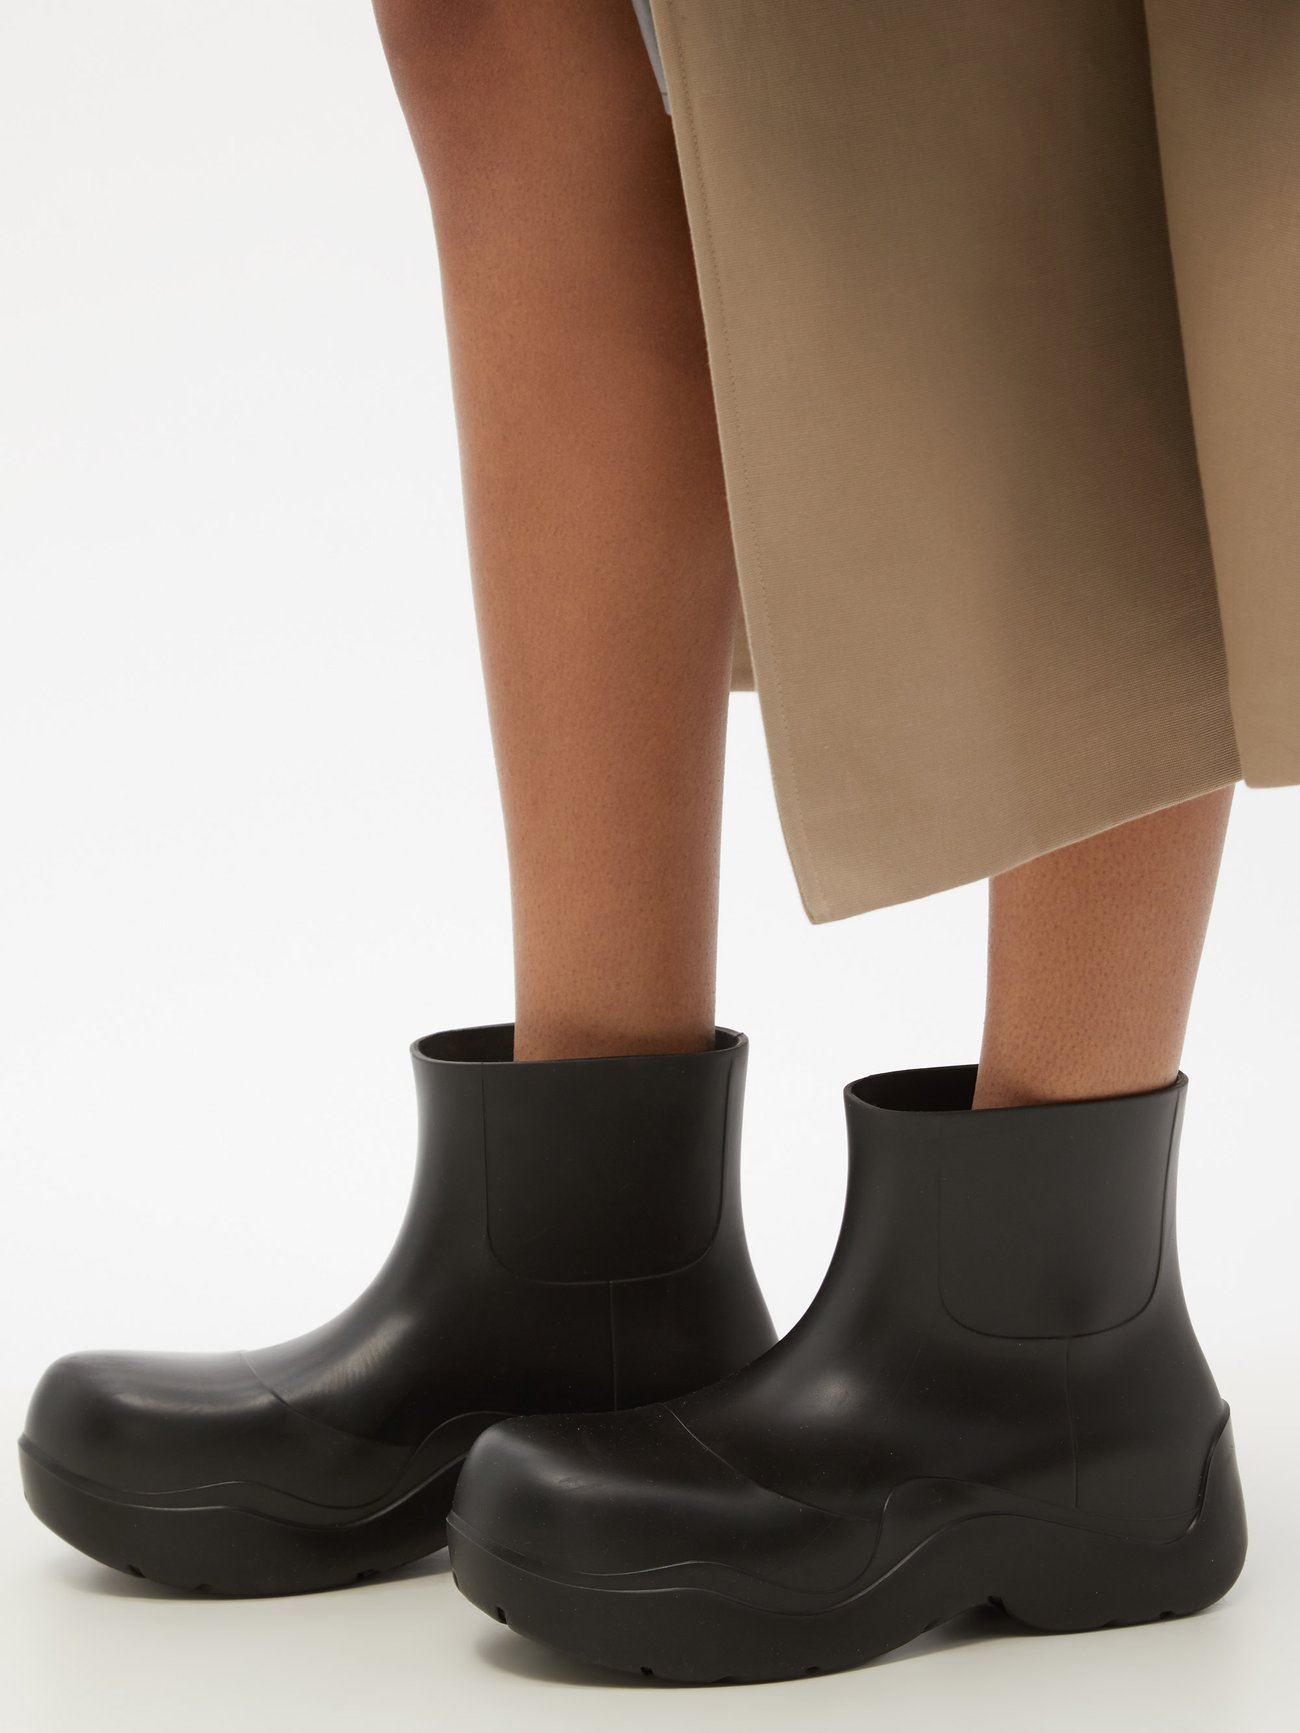 The Puddle biodegradable-rubber ankle boots